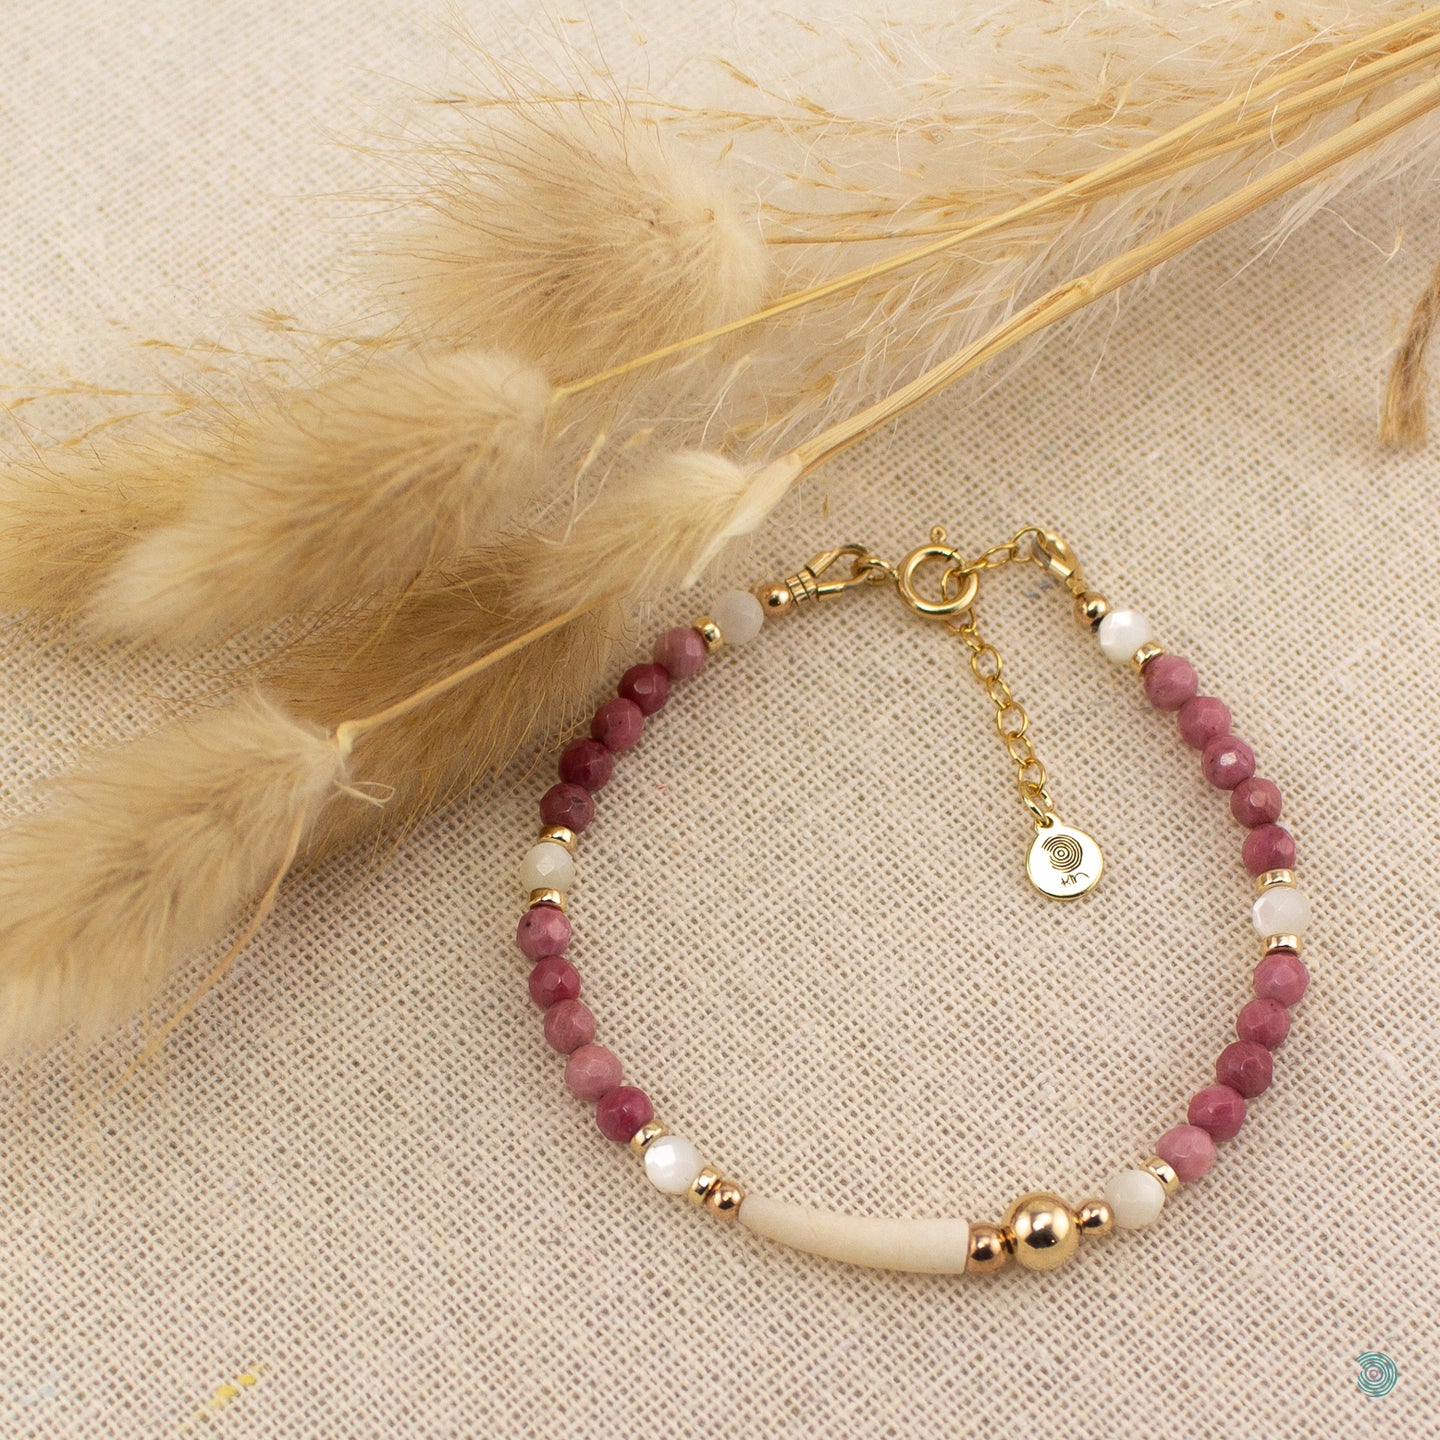 *One of a kind  Local, natural tusk shell necklace with pretty rhodonite, mother of pearl and 14k gold filled bead detail sitting on a gold filled chain.  This necklace is 18 inches in length with a 2 inch extension chain for adjustment.  It comes presented in a branded gift box for safe keeping or making it perfect for gift giving  Designed & Handmade in Dingle